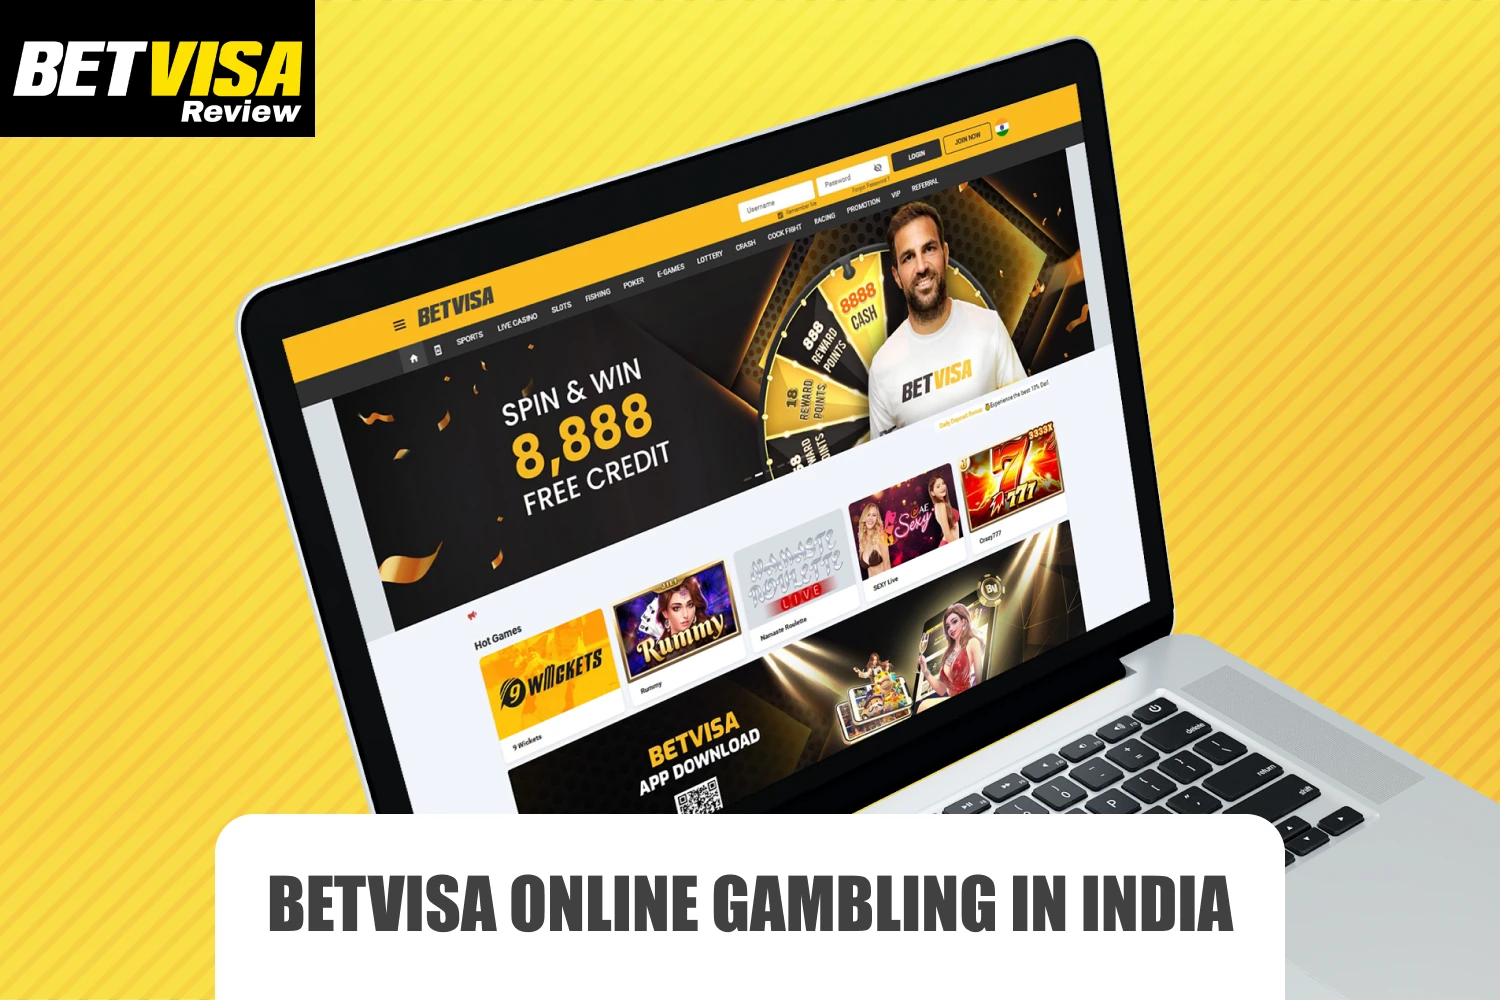 Betvisa is a gambling platform in India covering traditional table games and sports betting